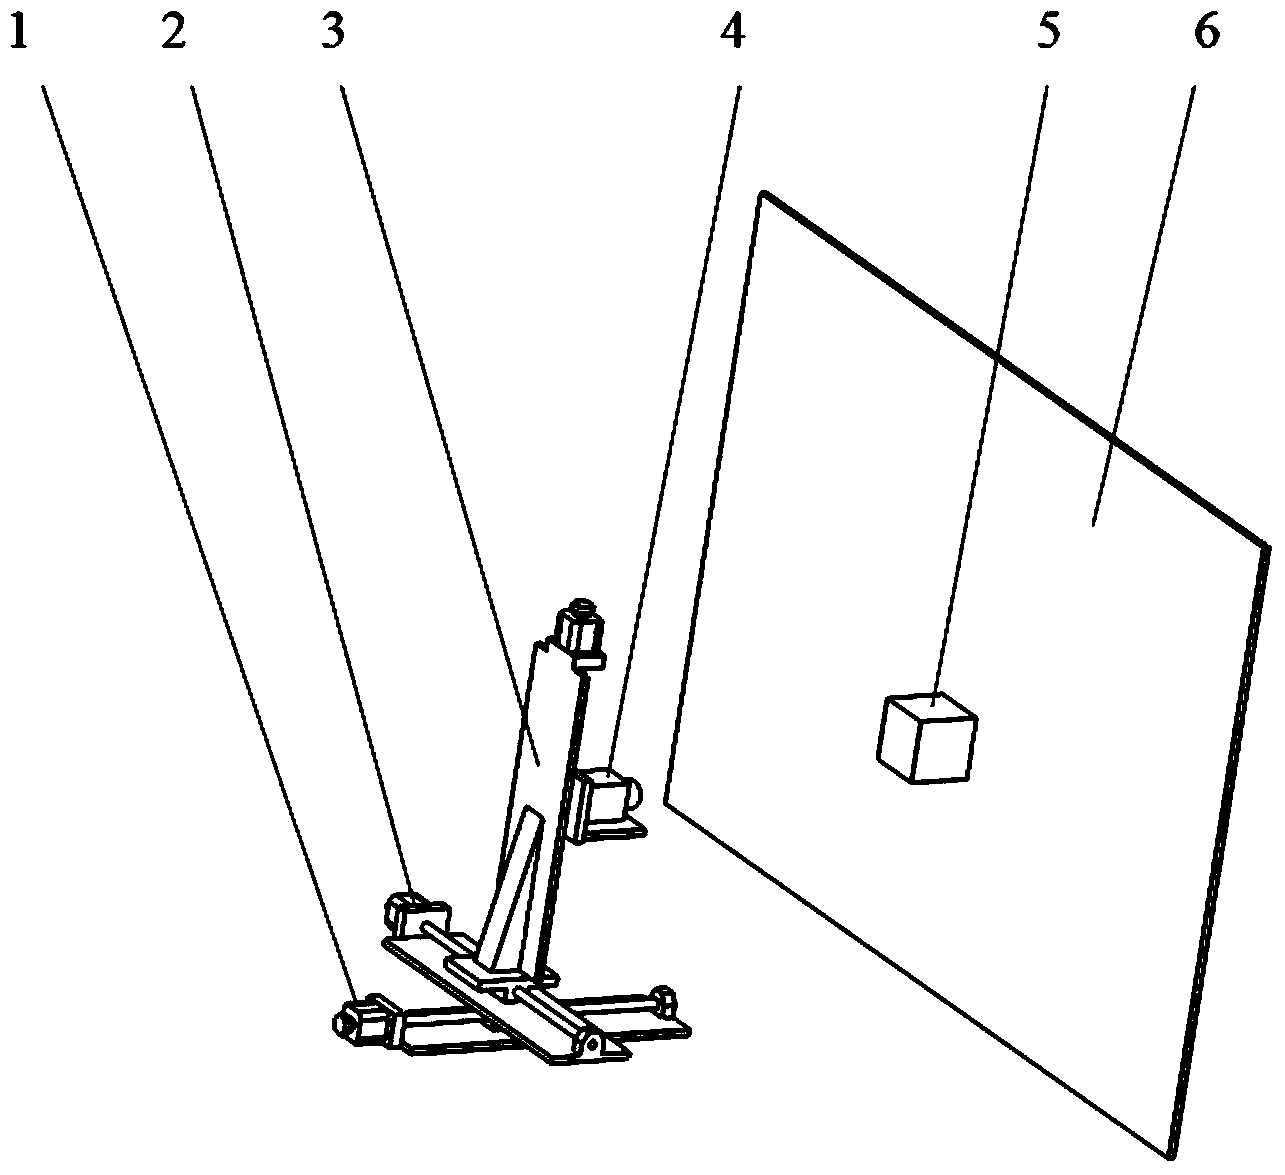 TOF depth camera three-dimensional coordinate calibration device and method based on virtual multi-cube standard target